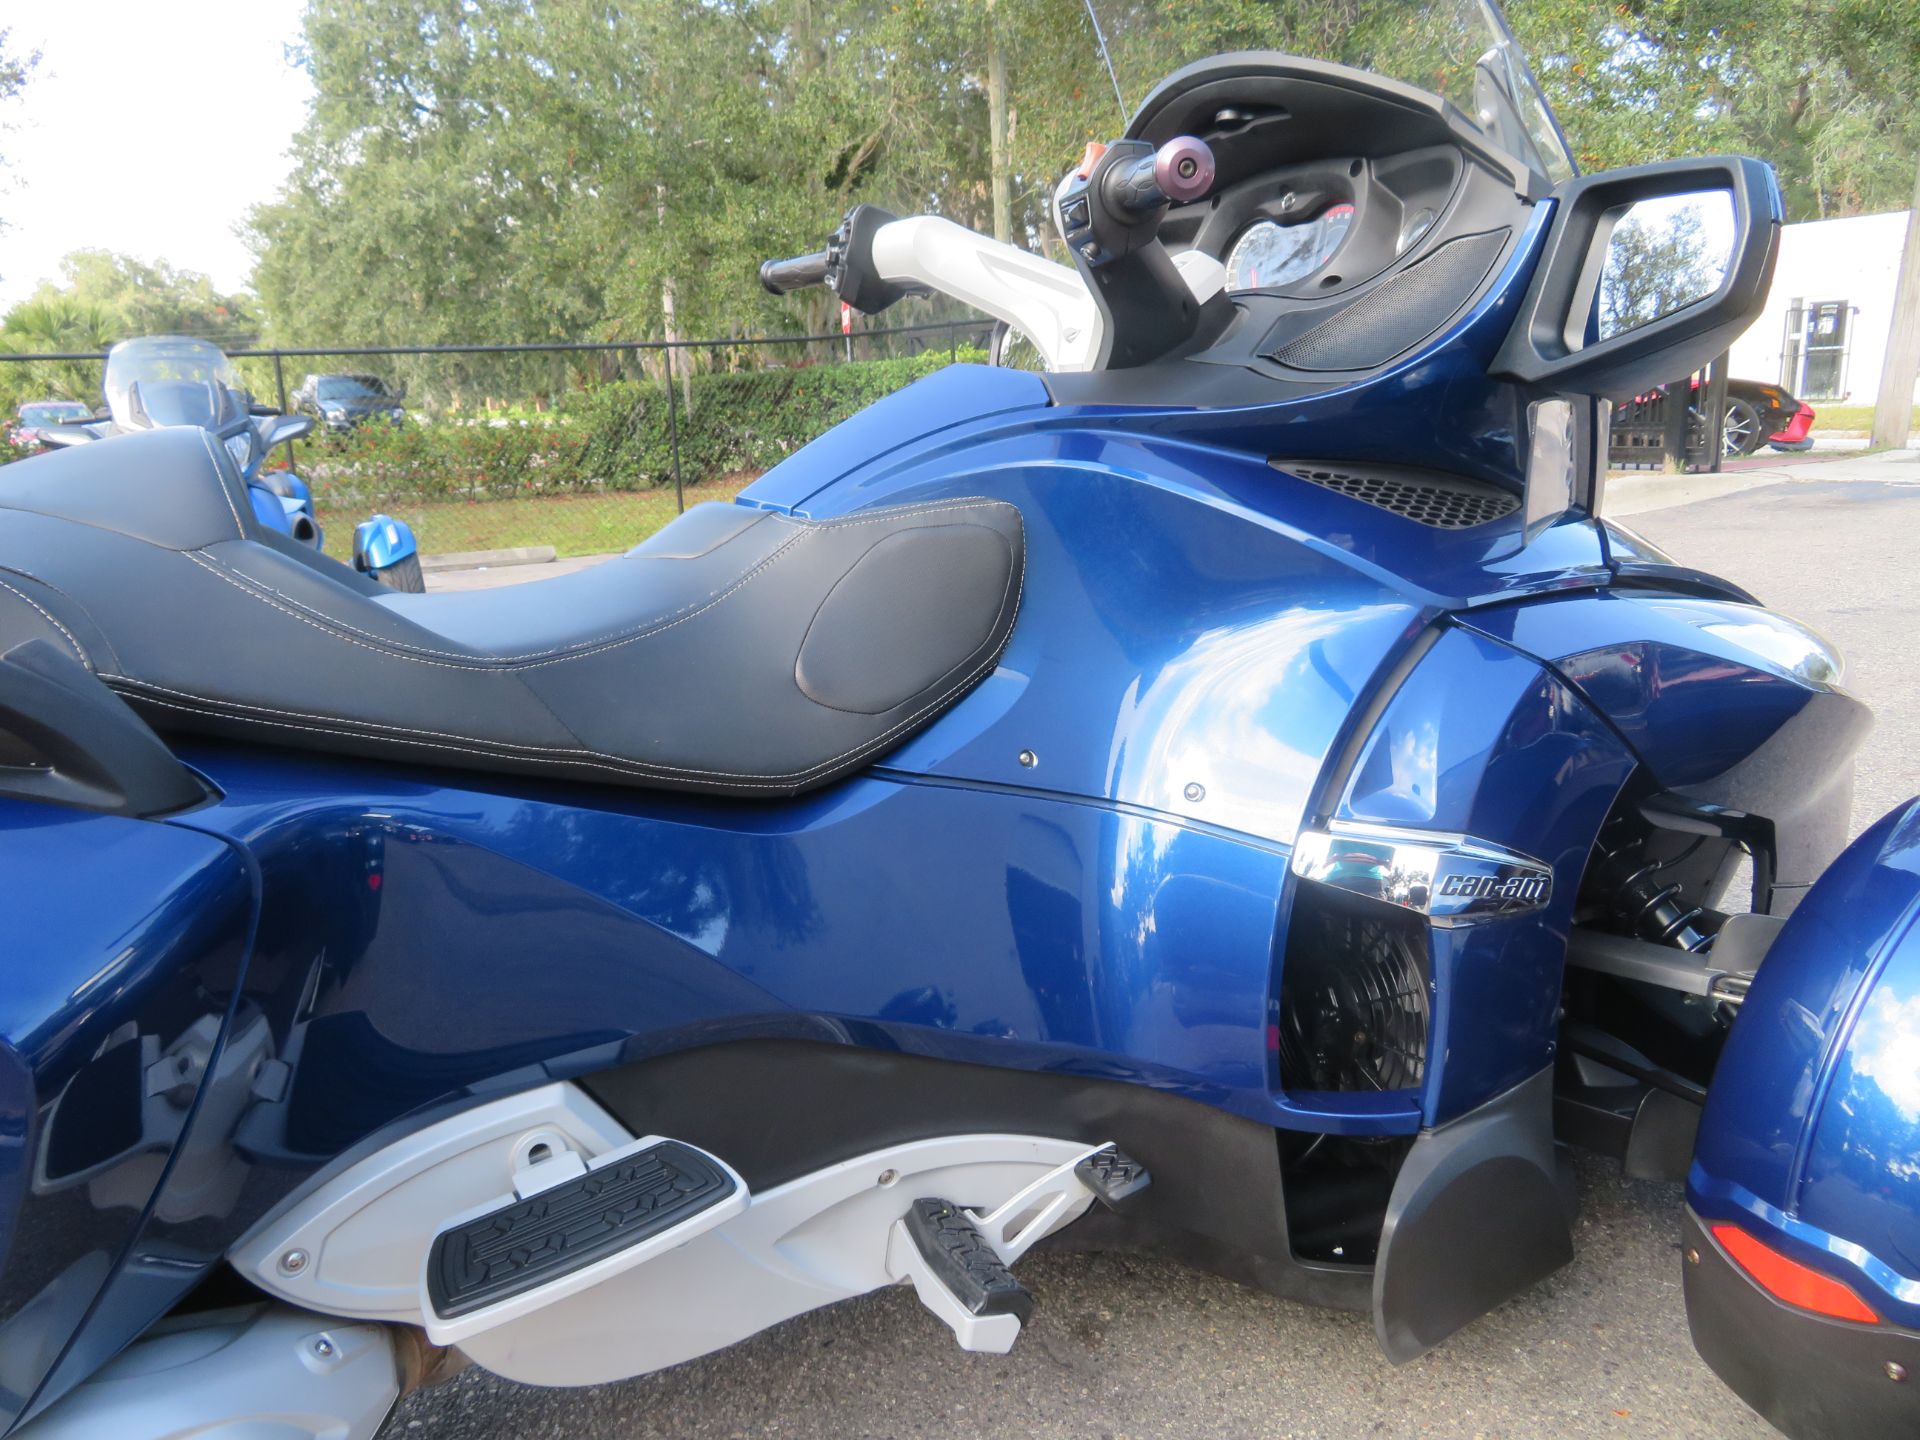 2011 Can-Am Spyder® RT-S SM5 in Sanford, Florida - Photo 12